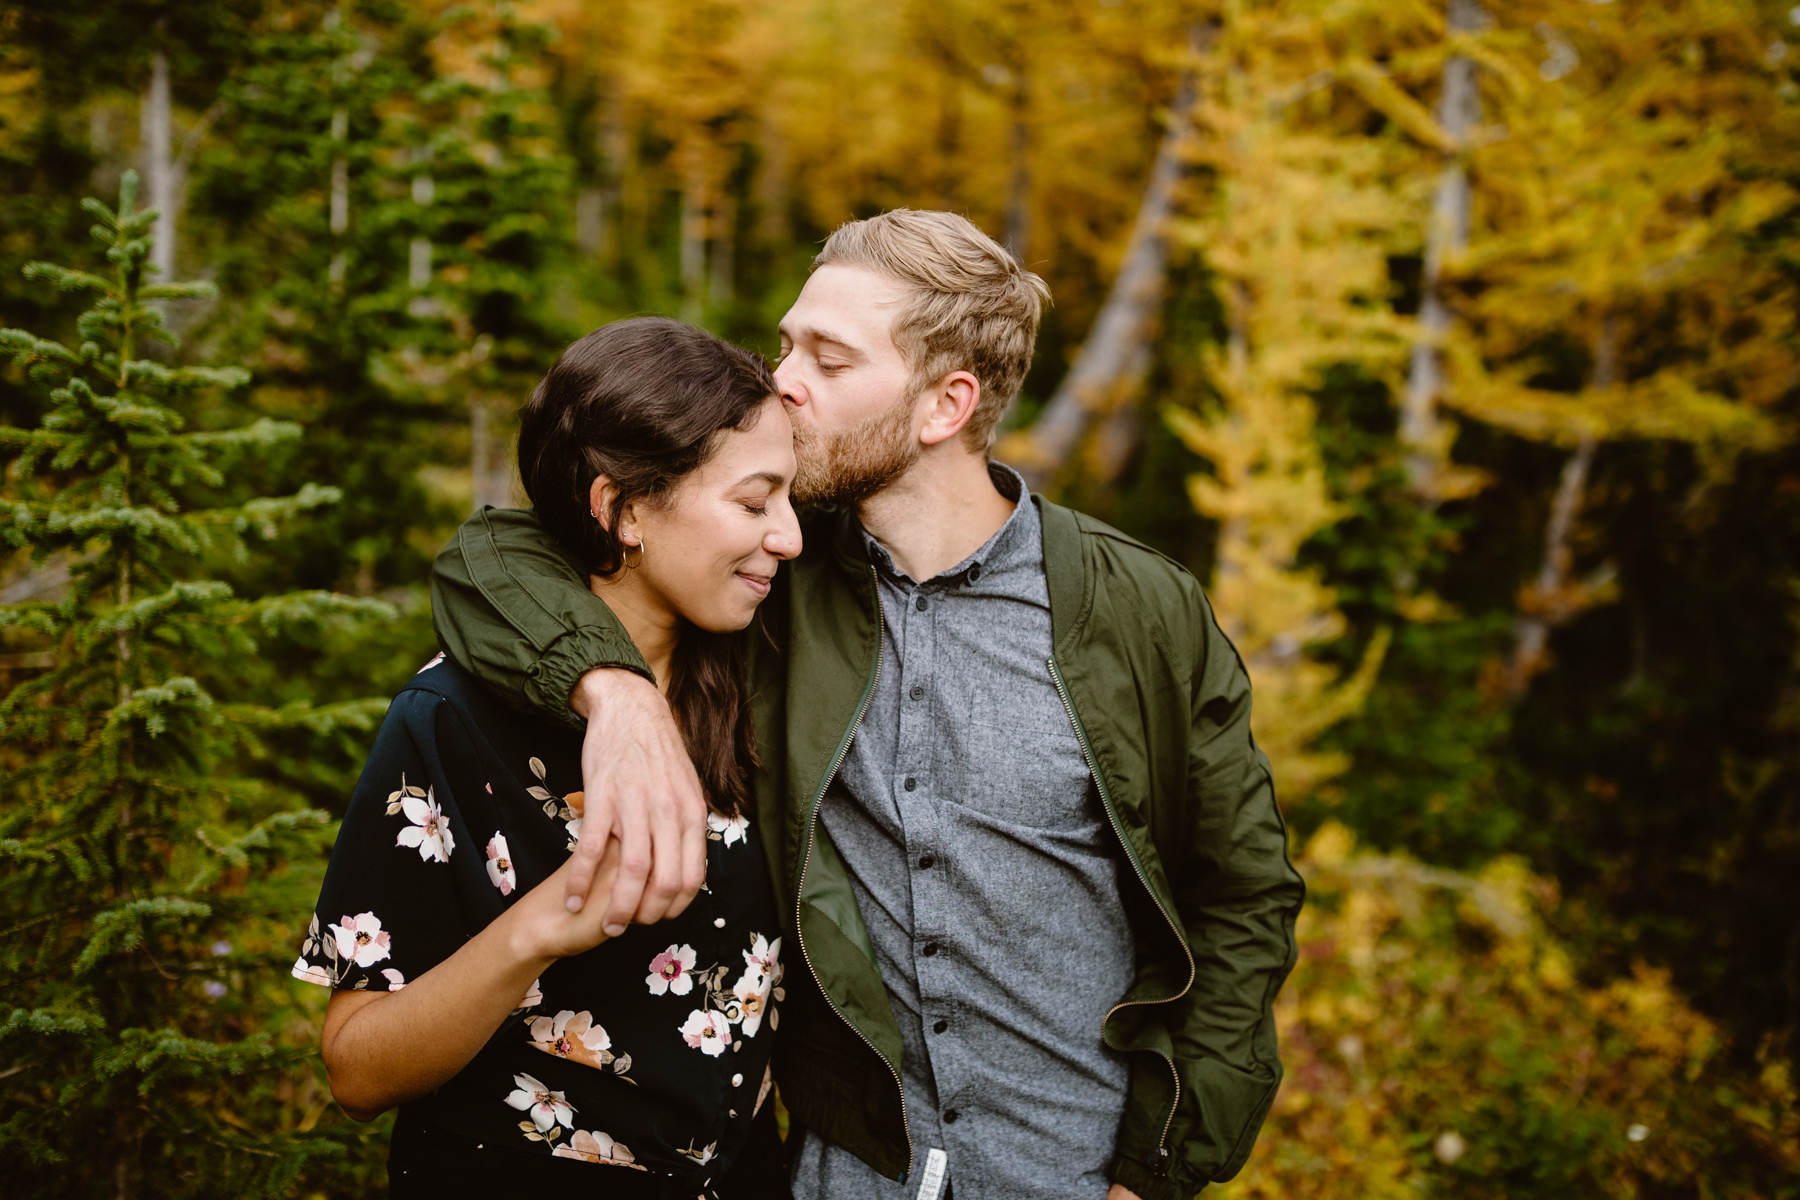 Canmore hiking engagement photos in Kananaskis Country - Image 32